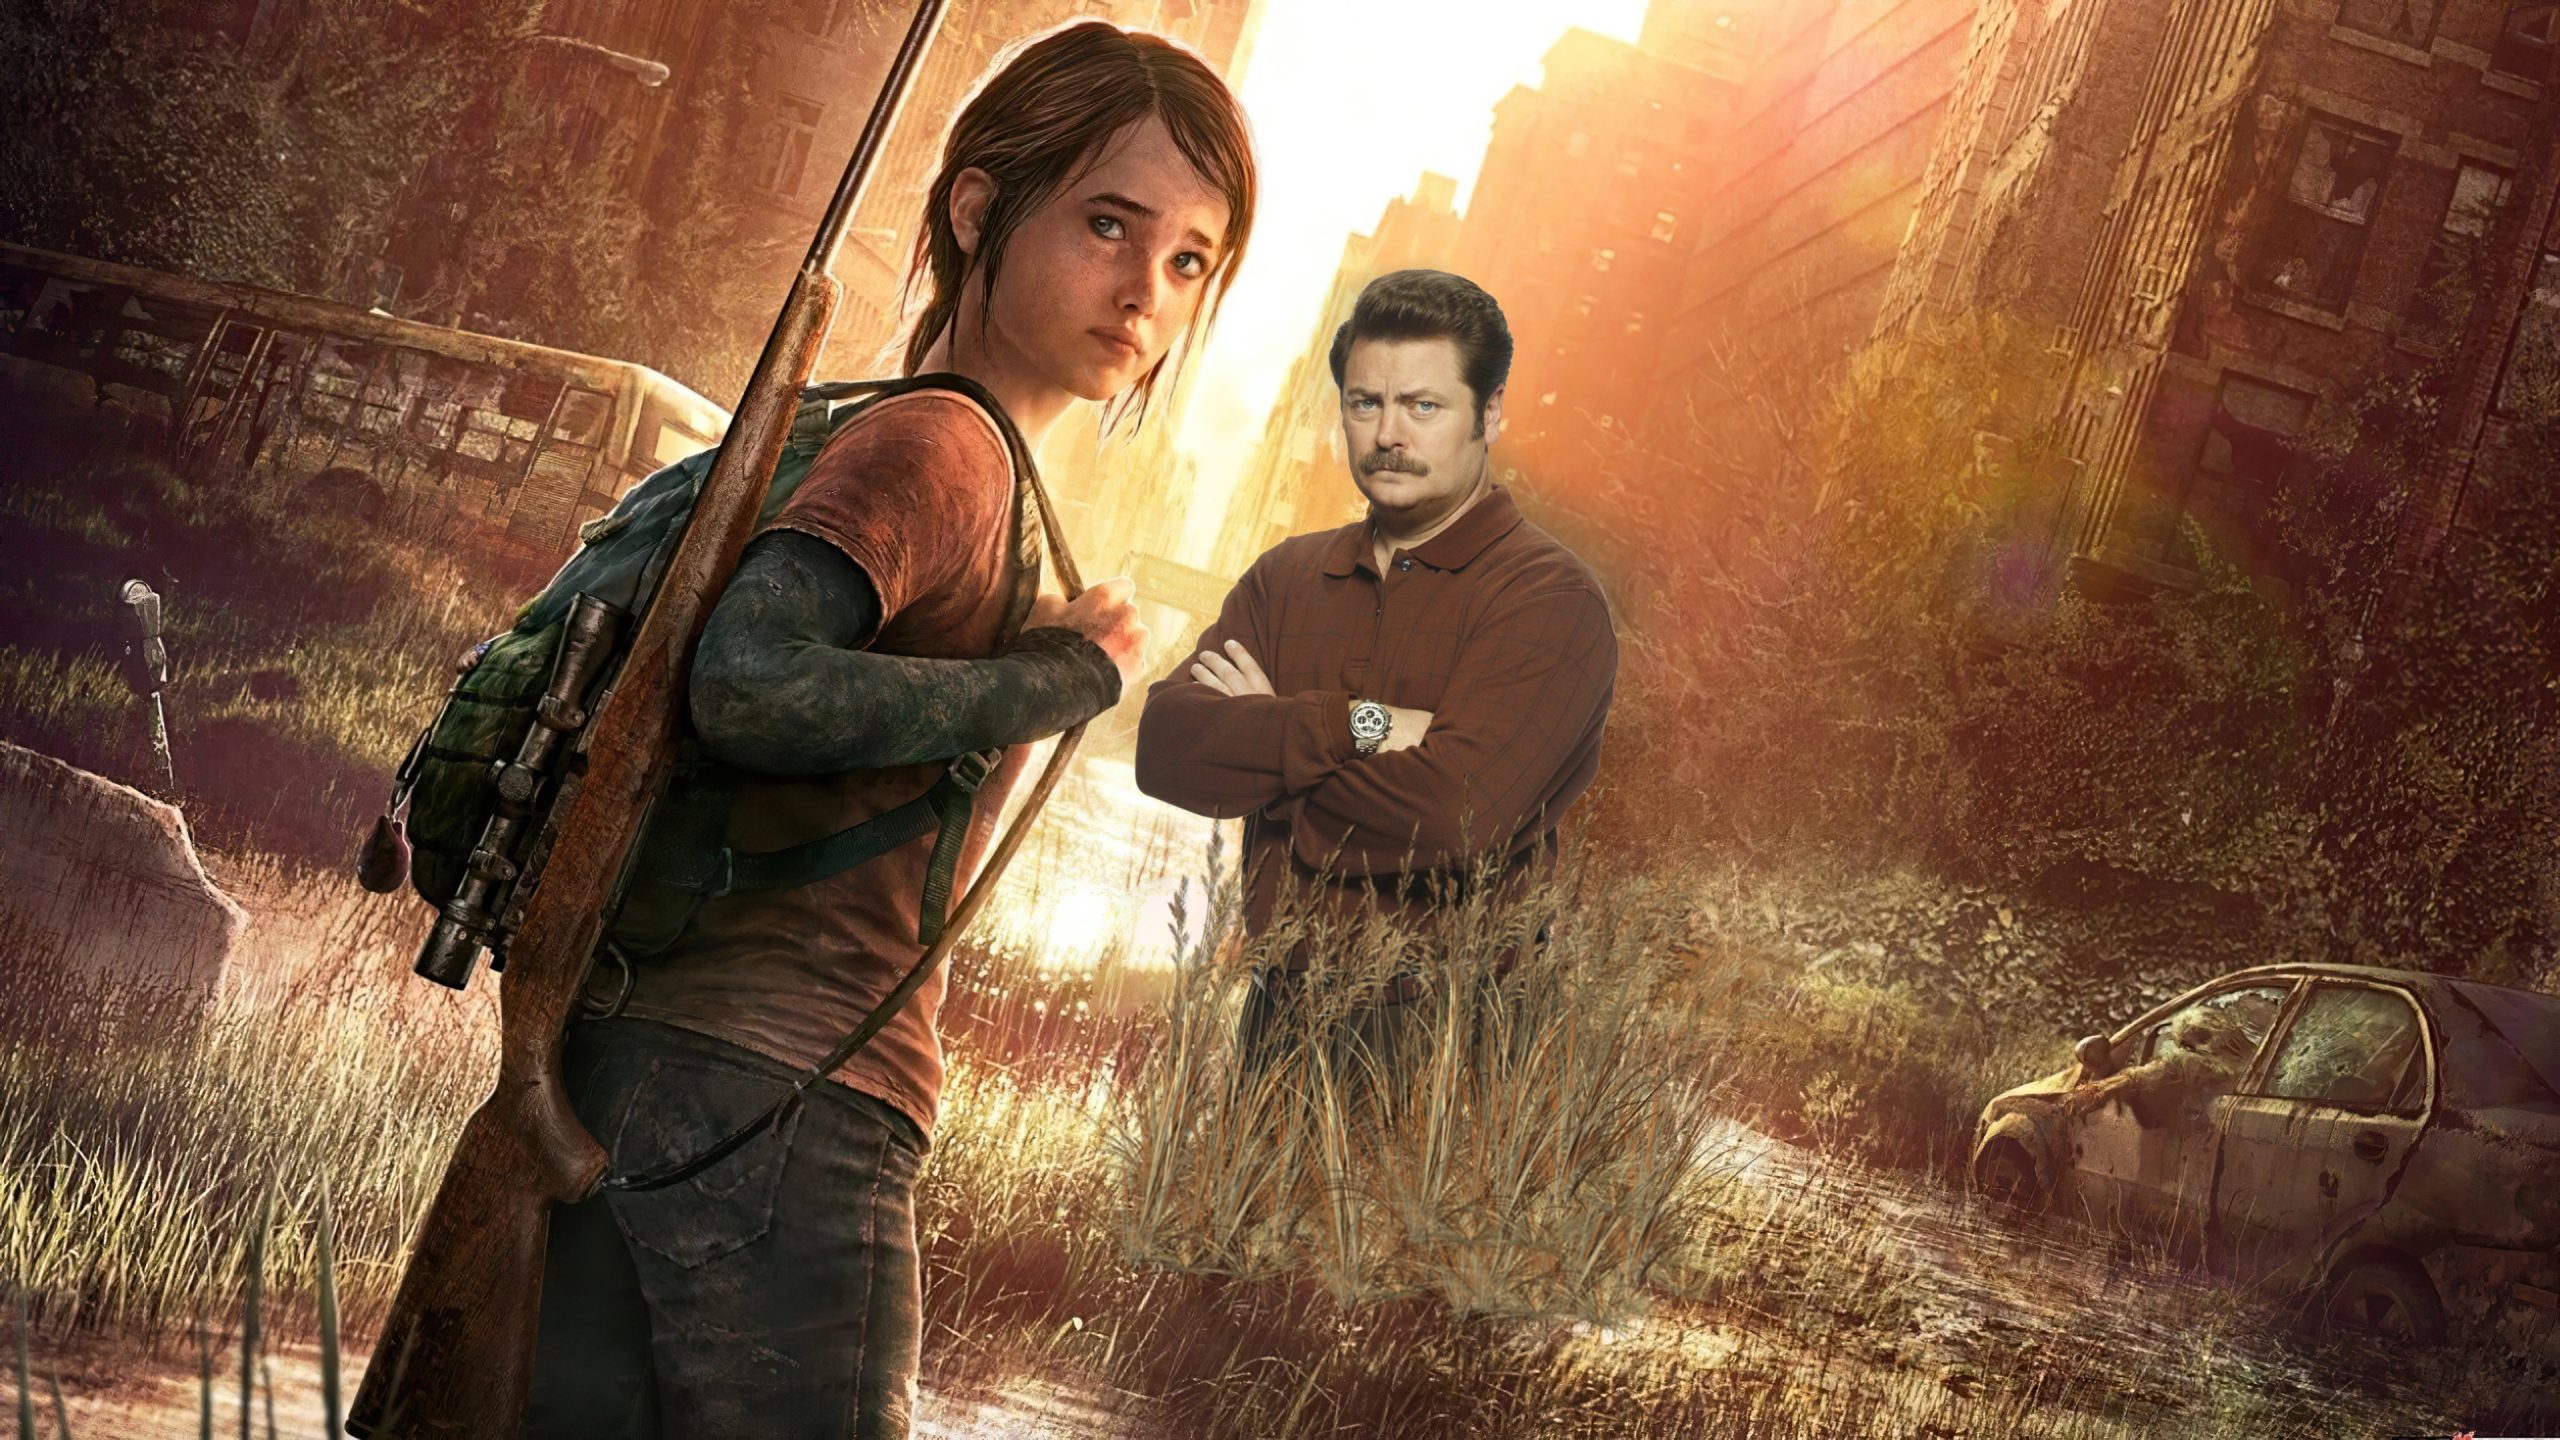 Ласт юс. The last of us 2013 Элли и Джоэл. Джоэл the last of us.